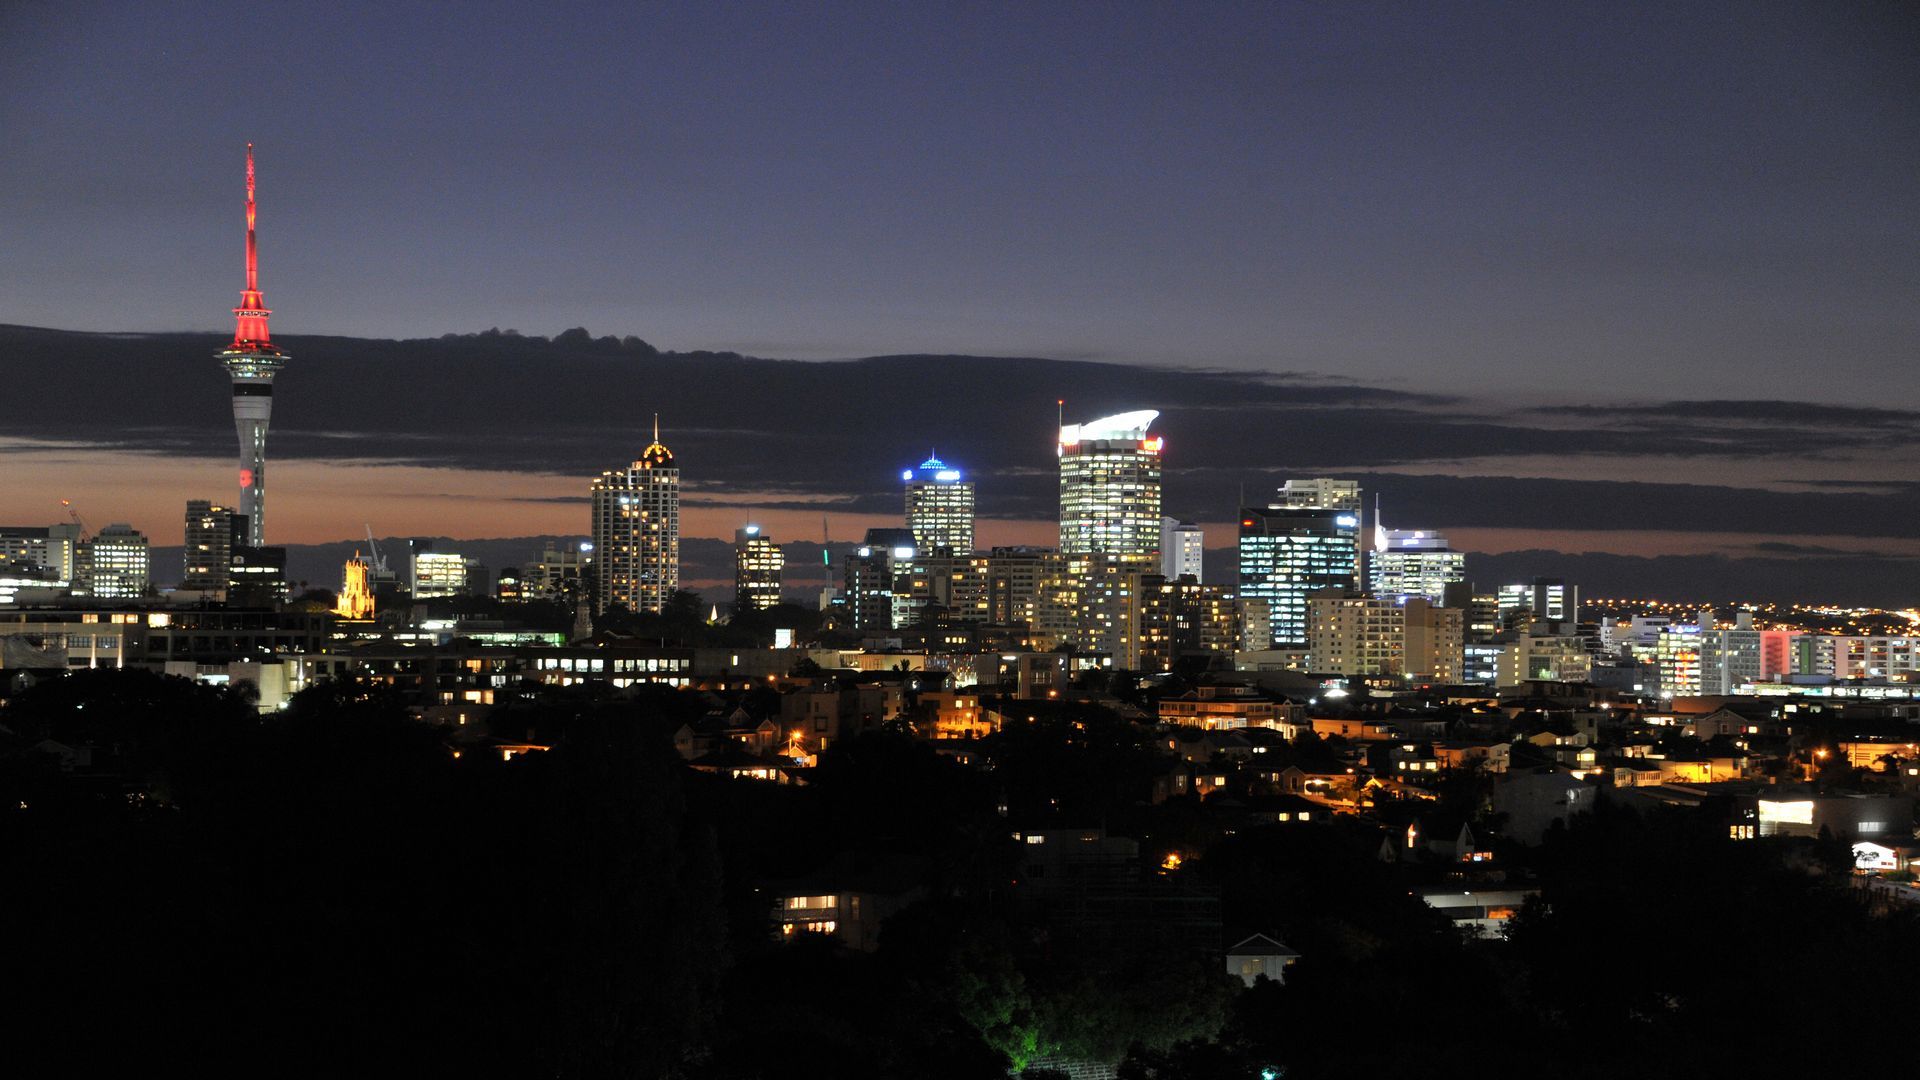 The Lights Of Auckland City At Night, As Seen From Parnell